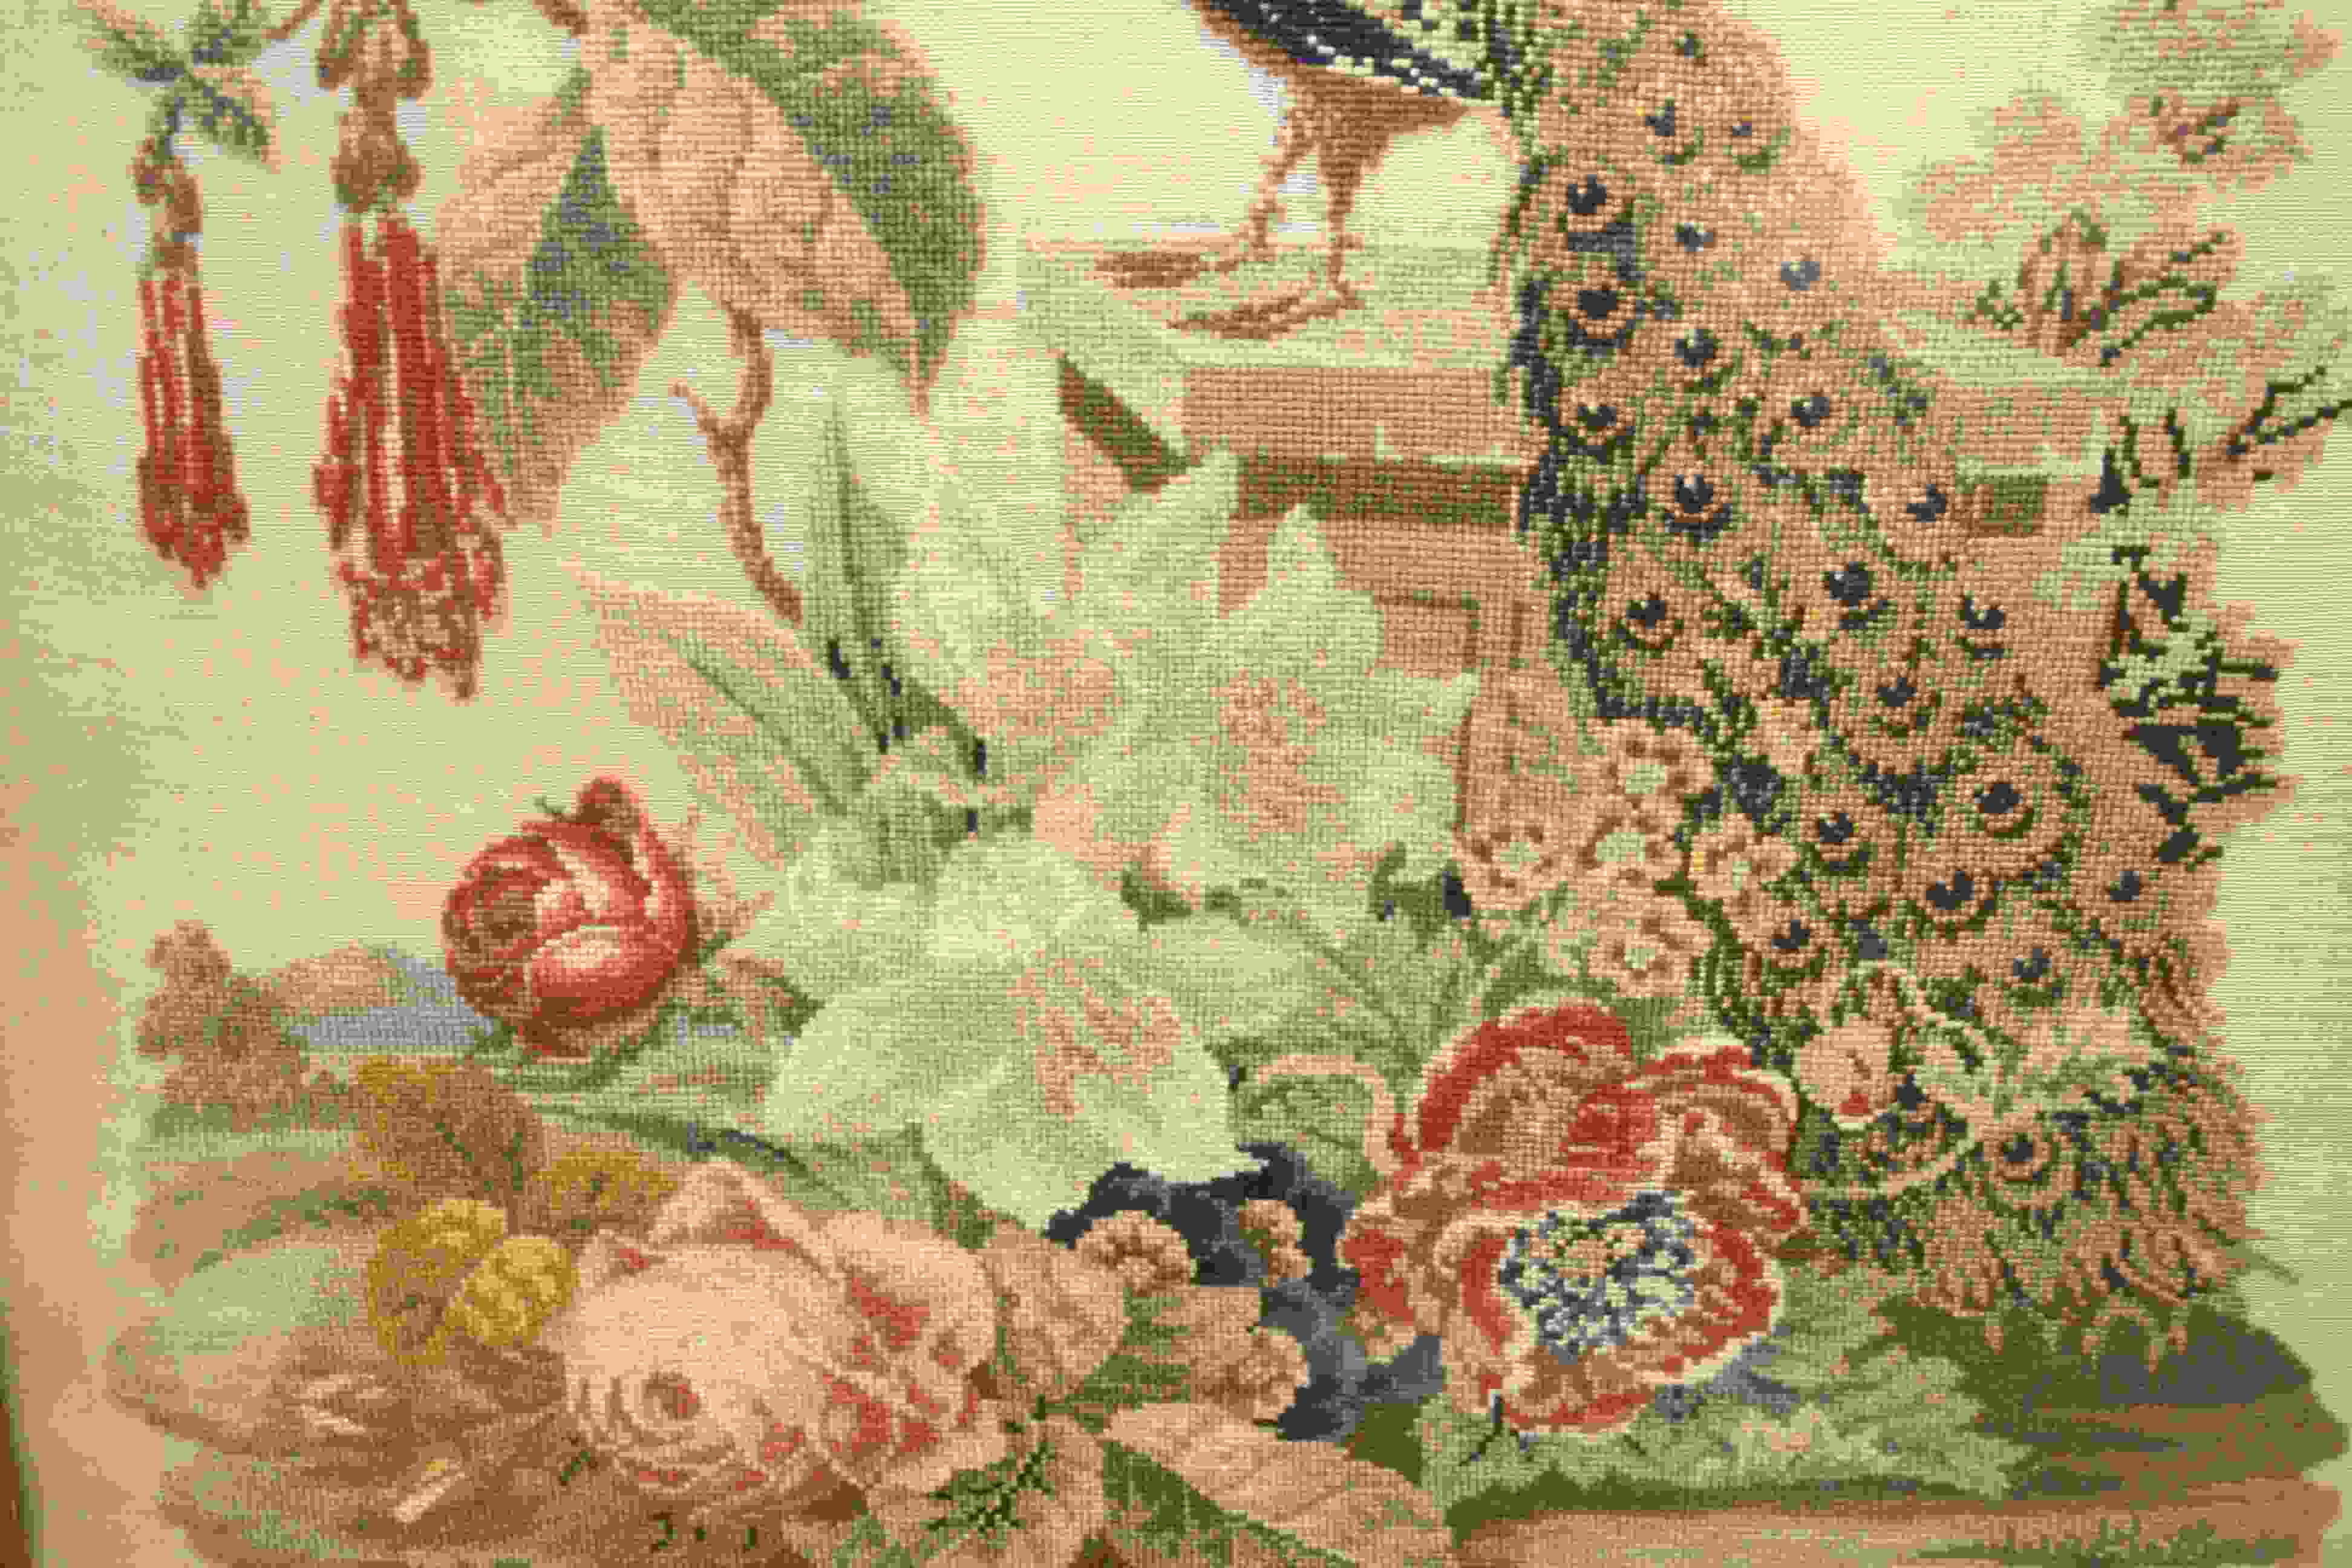 Framed and glazed tapestry of a peacock within floral scene approx. 77cm x 68cm - Image 5 of 5